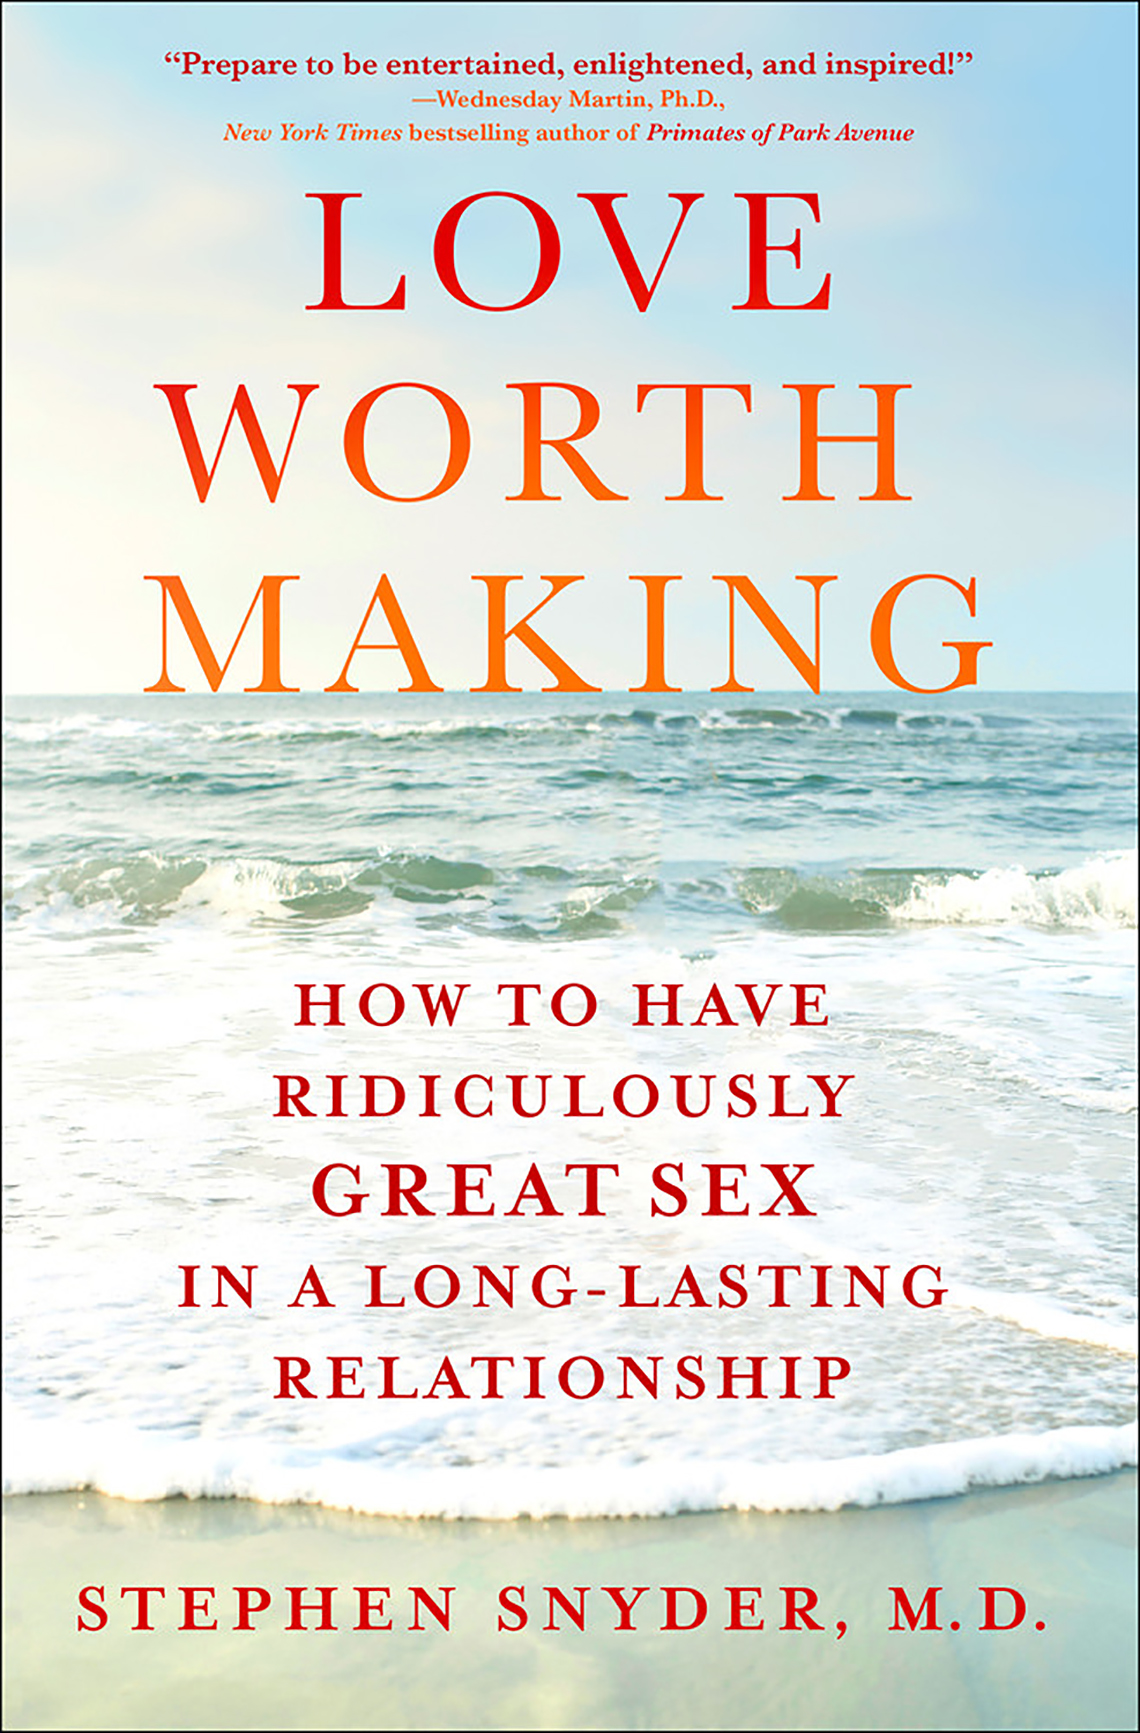 Book cover of Love Worth Making by Stephen Snyder. A sunset view of the ocean from a shore